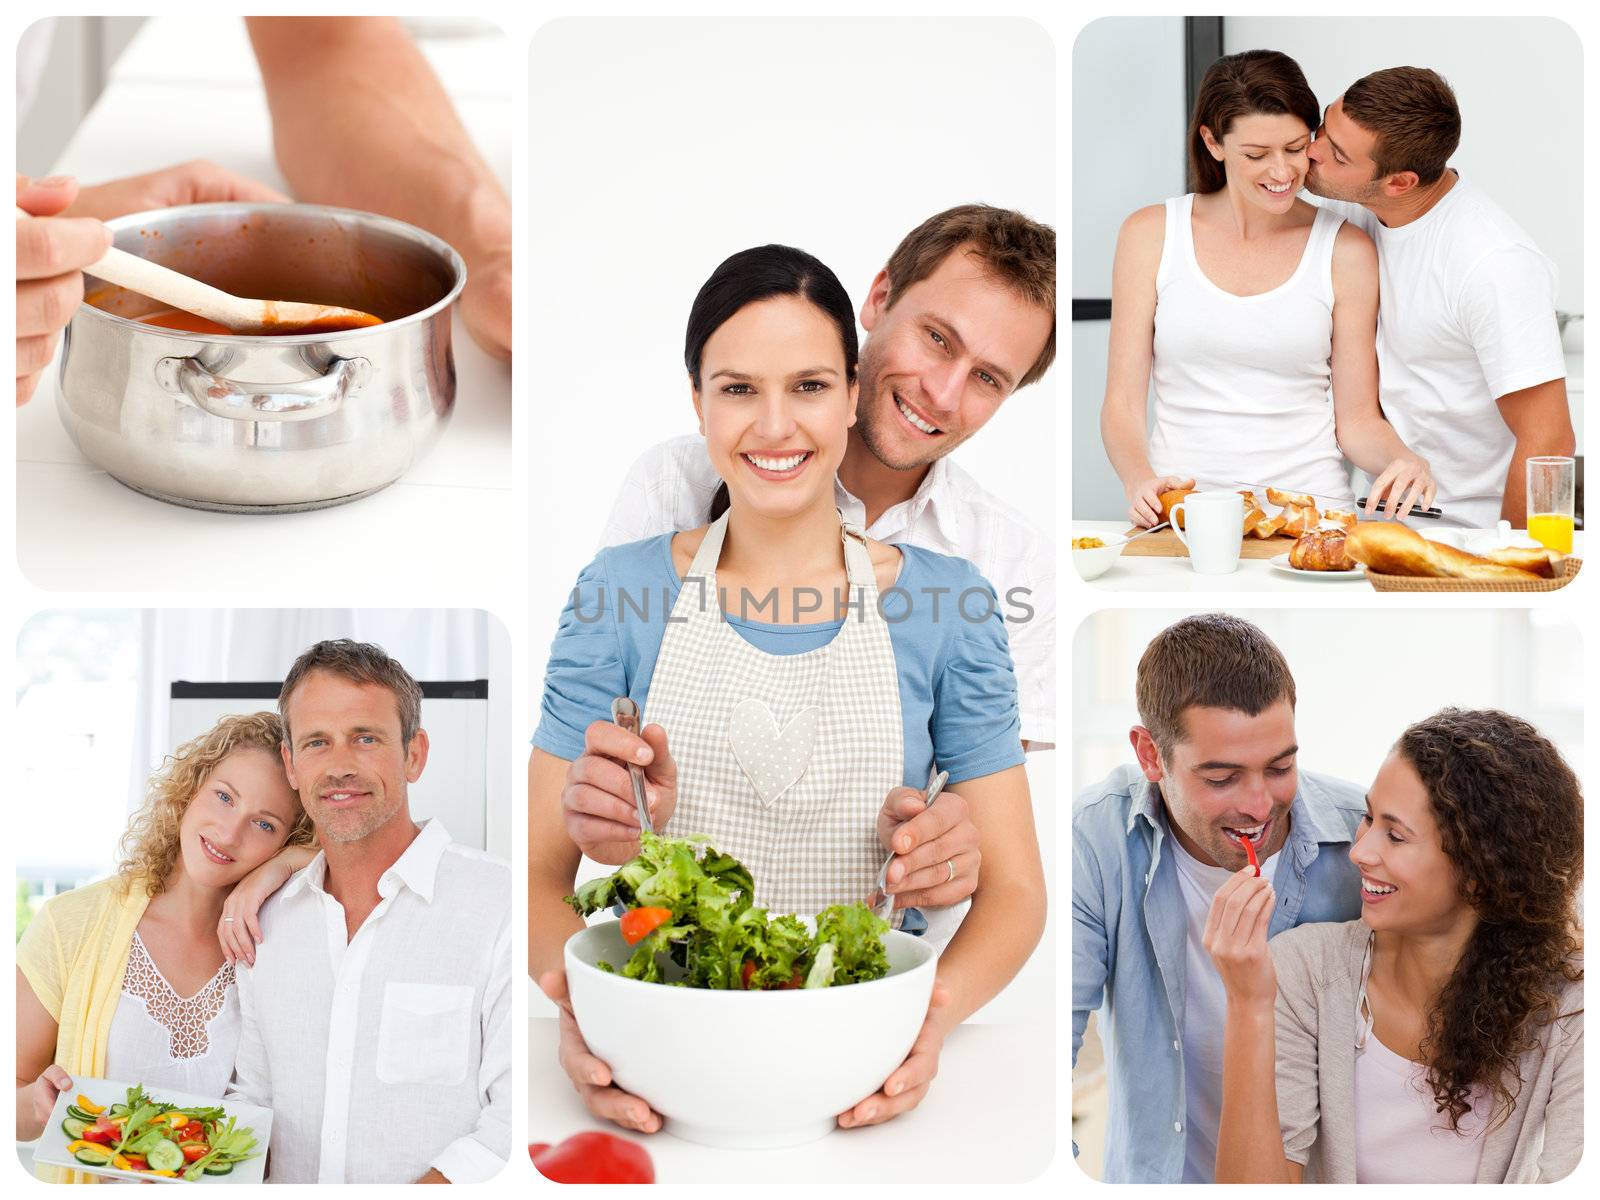 Collage of young couples in the kitchen